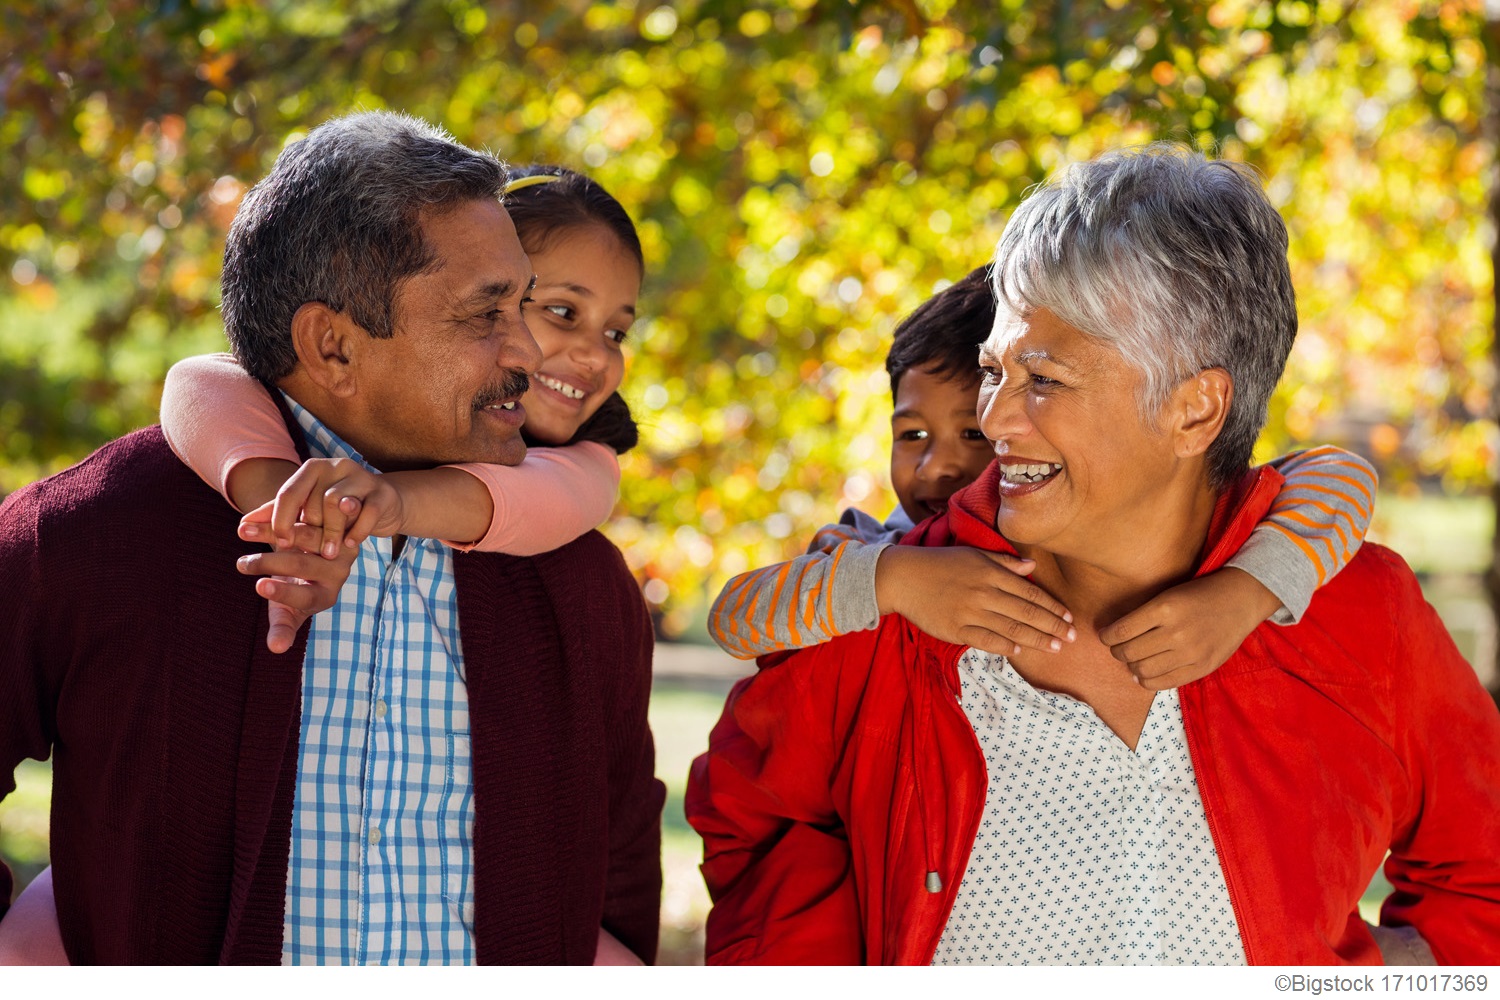 grandparent-health-and-family-well-being-the-vanier-institute-of-the